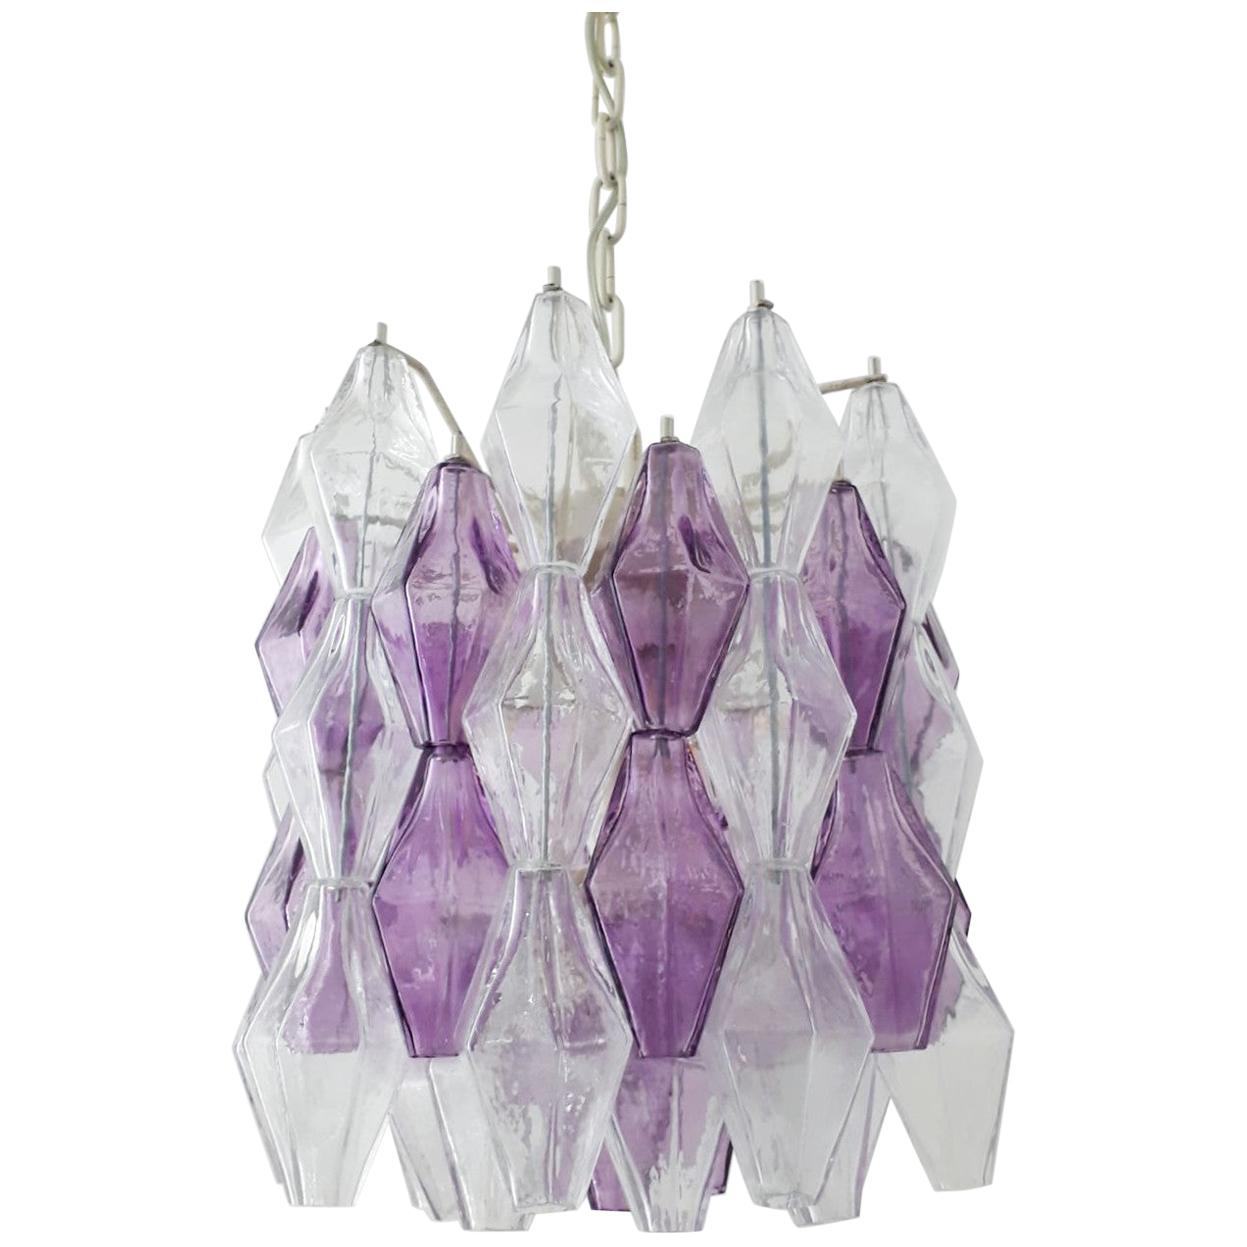 Poliedri Chandeliers by Venini - 2 Available For Sale